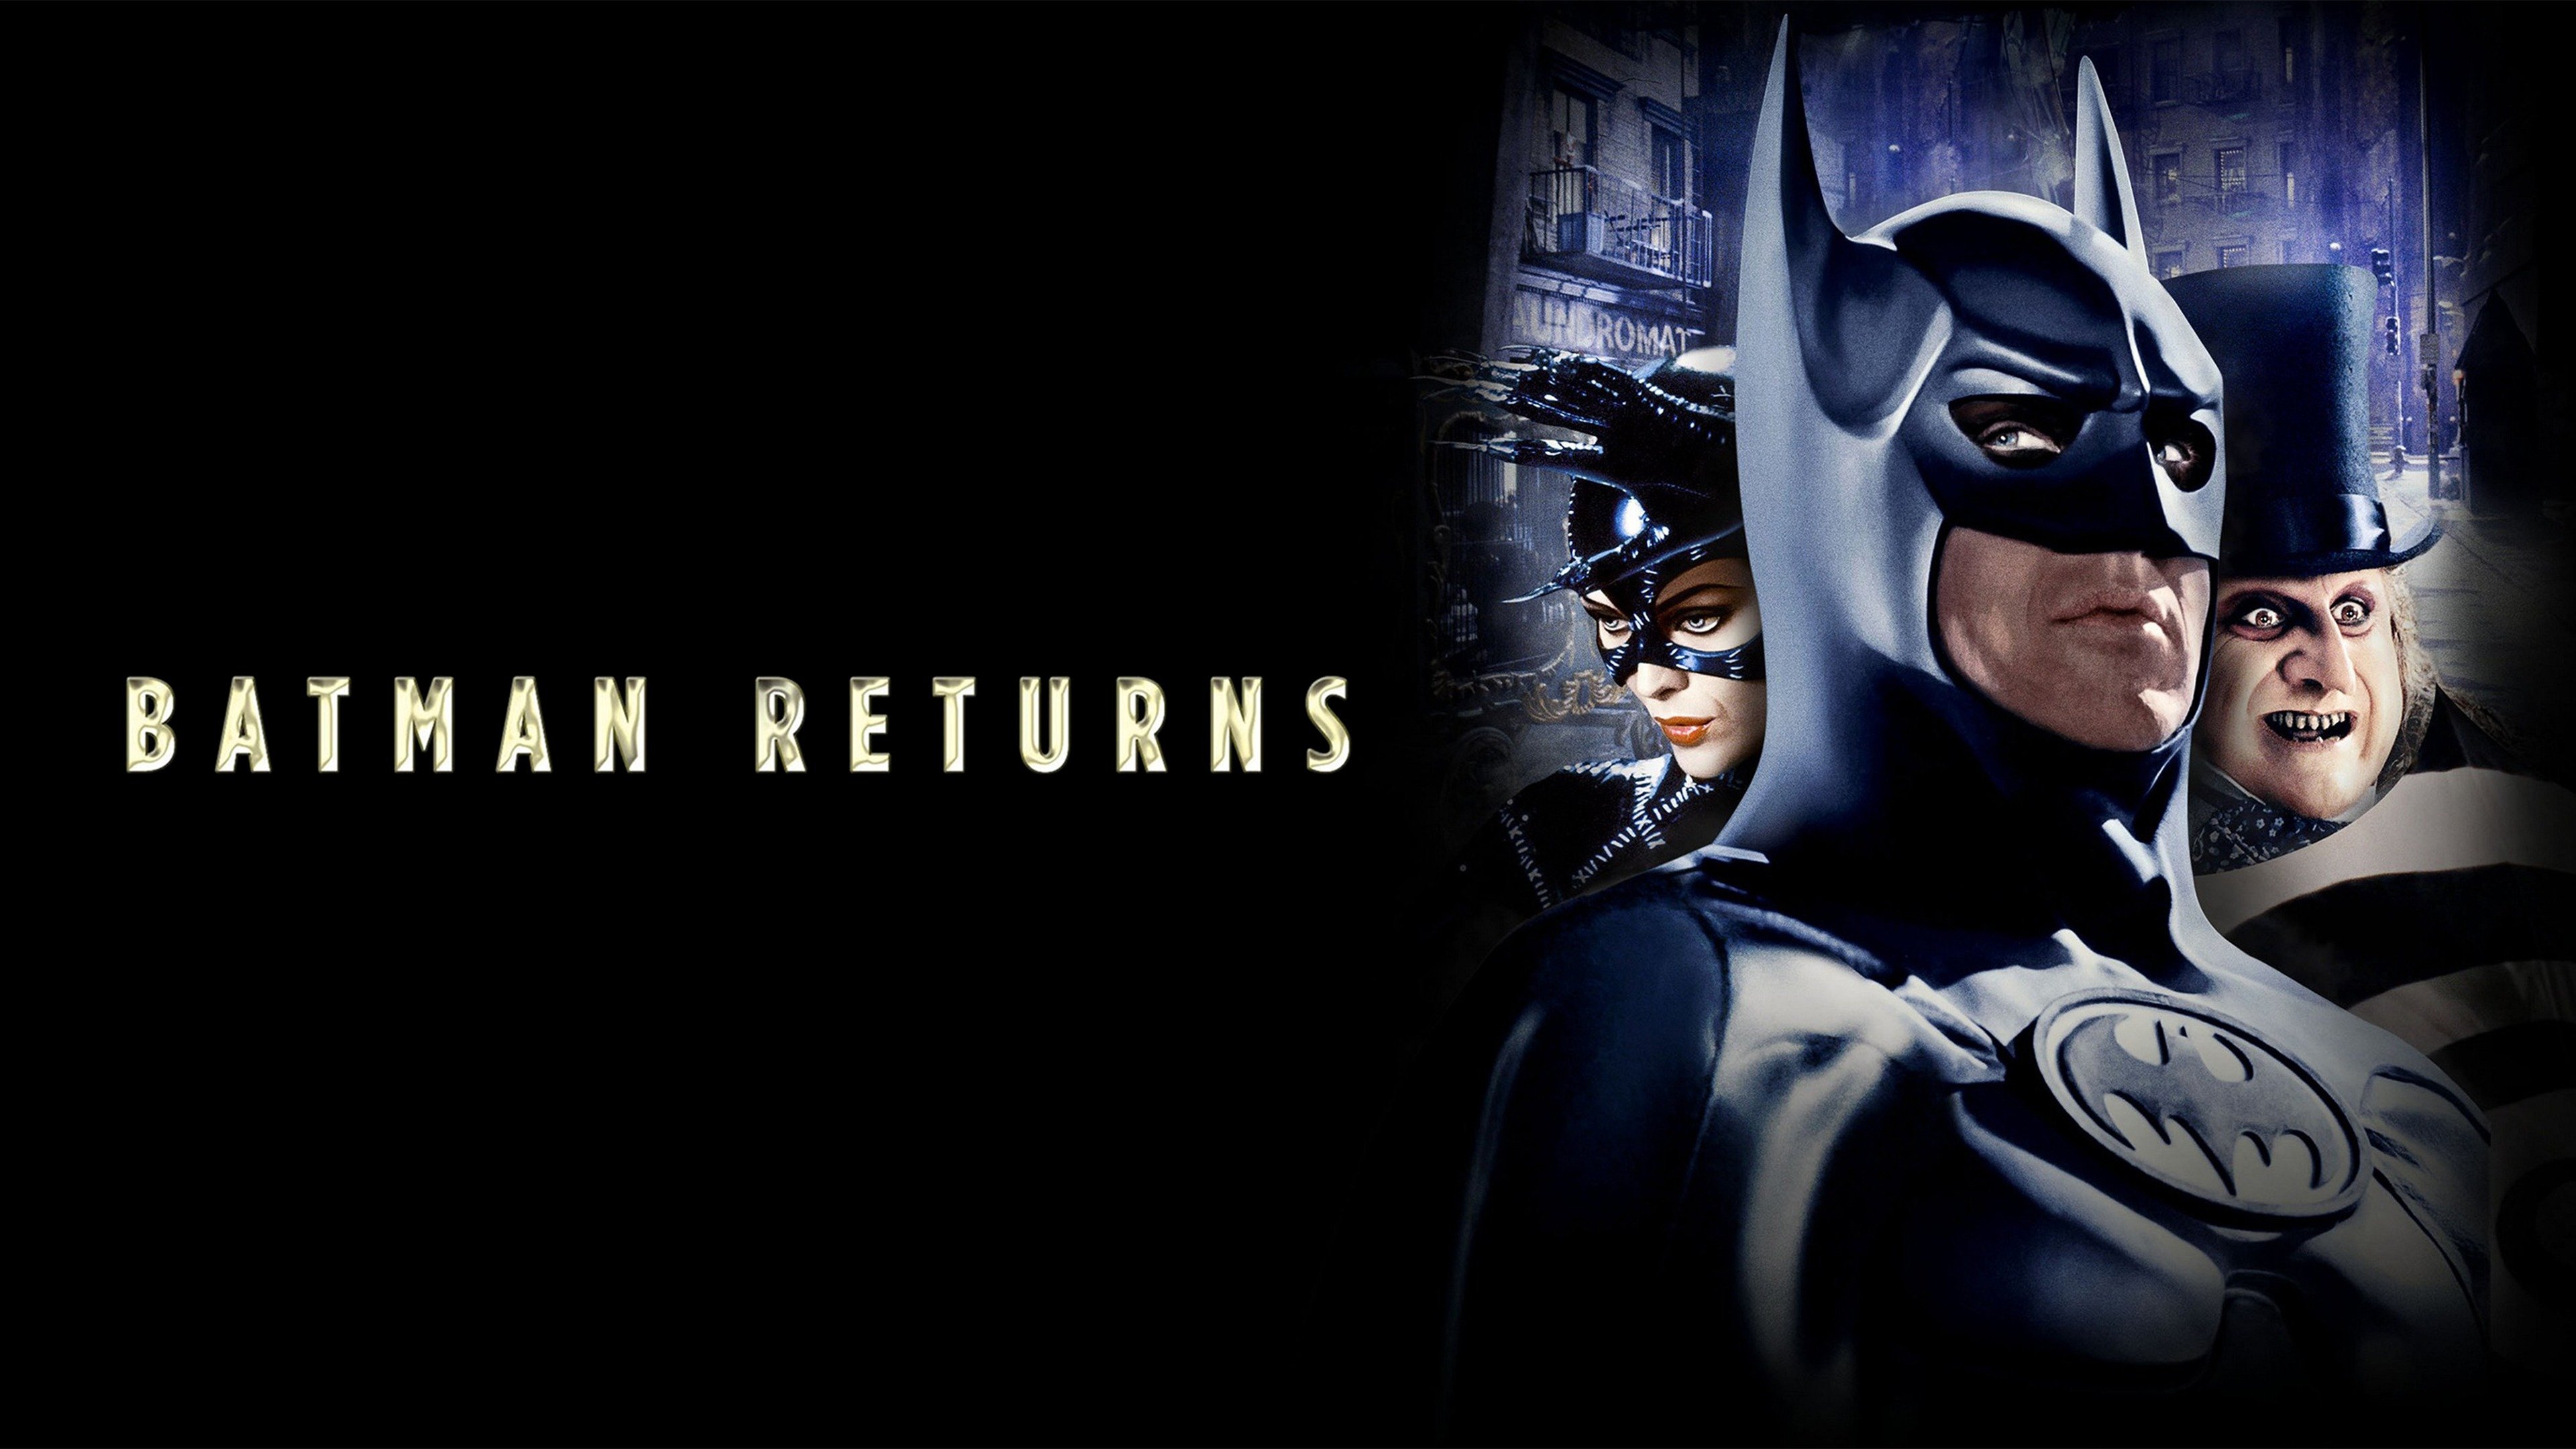 Batman Returns wallpapers for desktop download free Batman Returns  pictures and backgrounds for PC  moborg